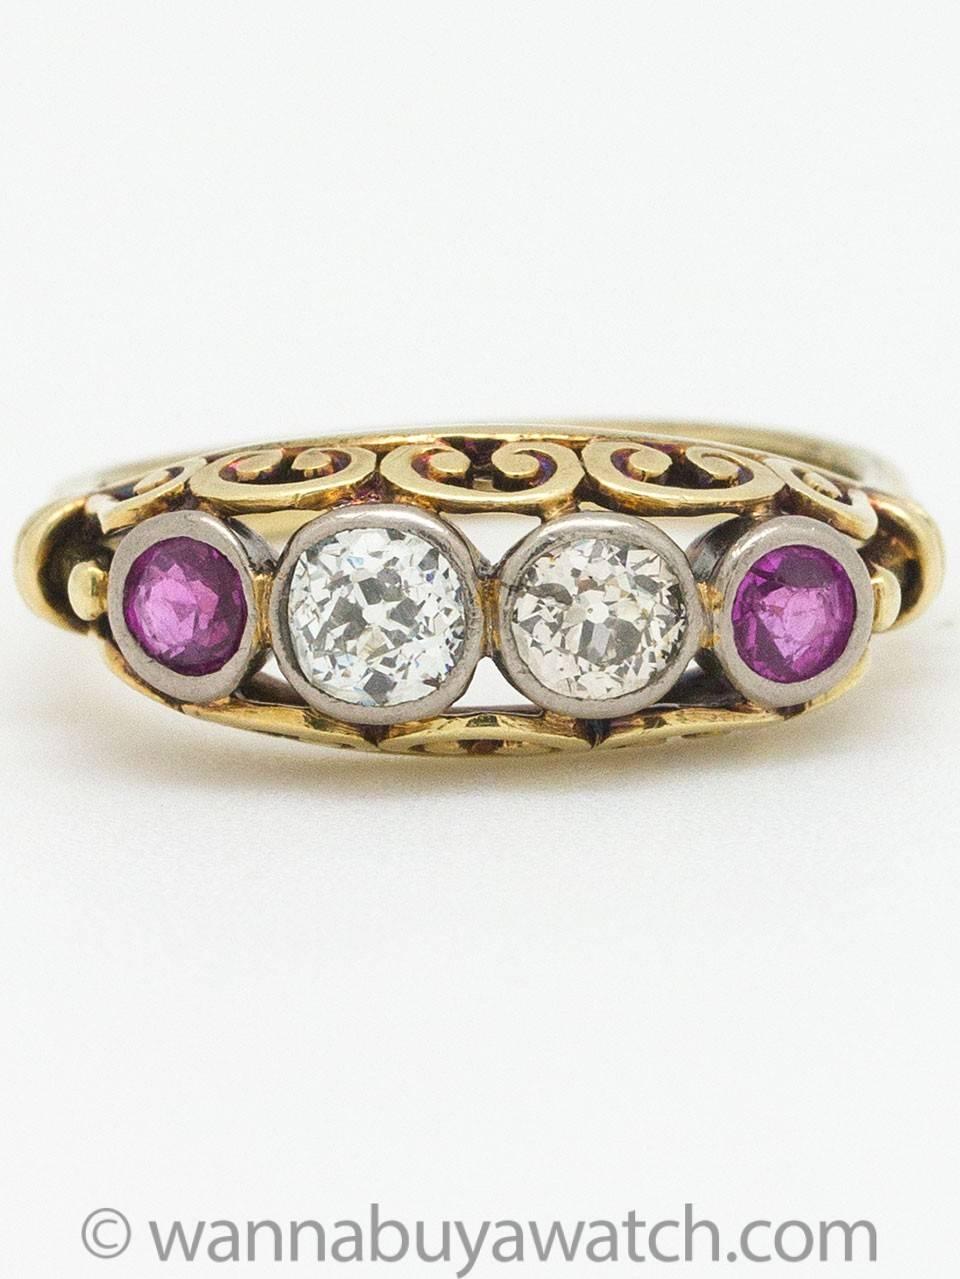 Gorgeous 14k yellow gold antique ruby diamond ring with two Old European cut diamonds and two rubies. Lovely swirl side motif with bezel set stones and lovely patina. Diamond total weight is approximately .75ct, SI-I3 clarity, H-M color. Ruby total